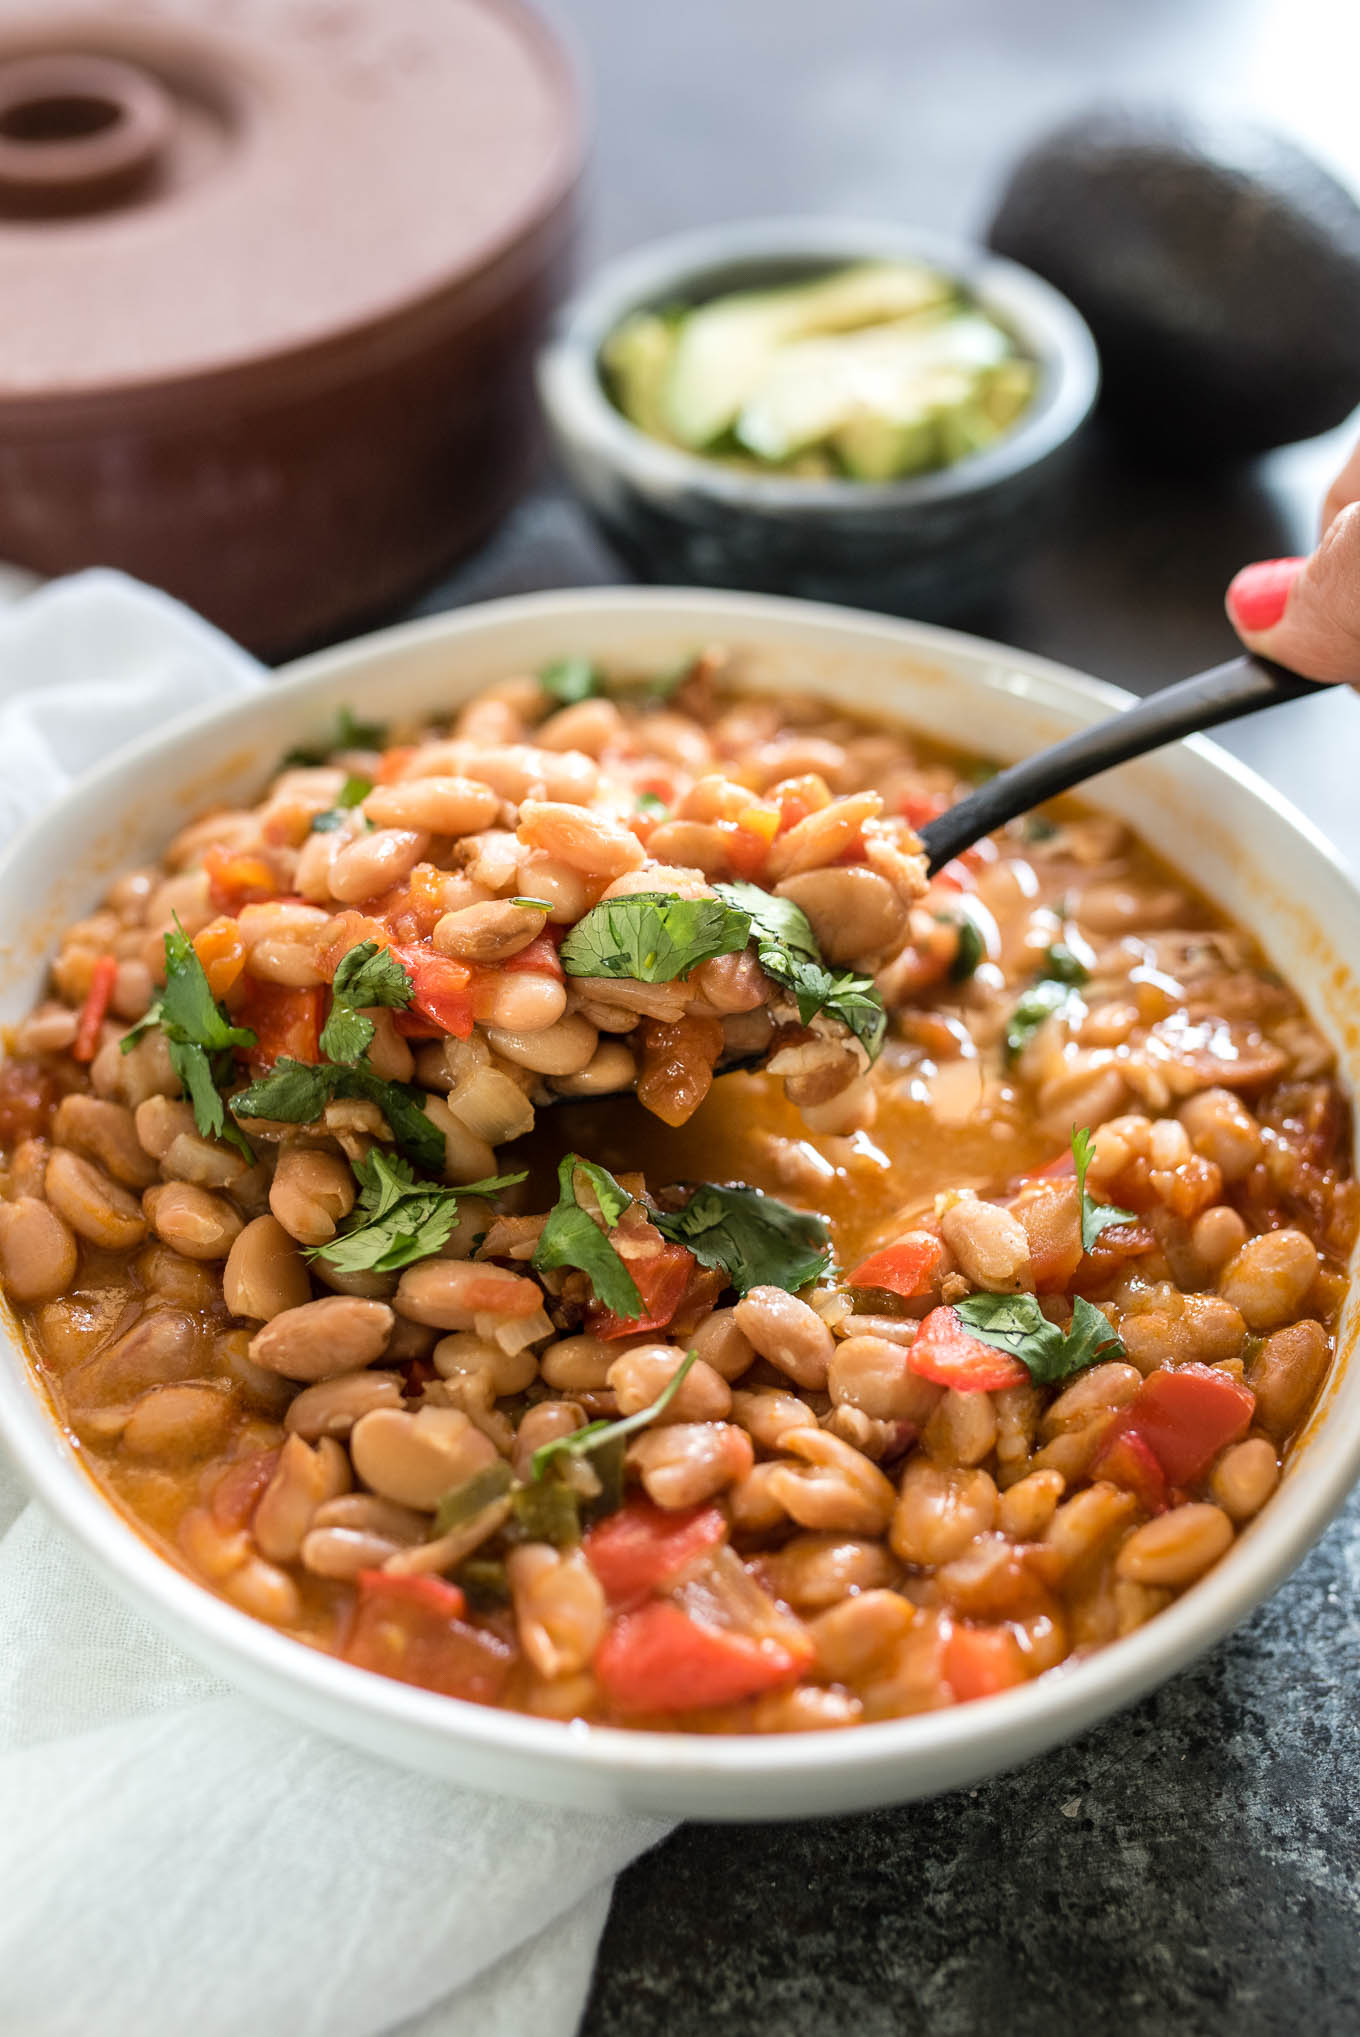 Instant Pot Borracho Beans, aka Frijoles Borrachos are the perfect Mexican style beans infused with flavor from the pressure cooker.